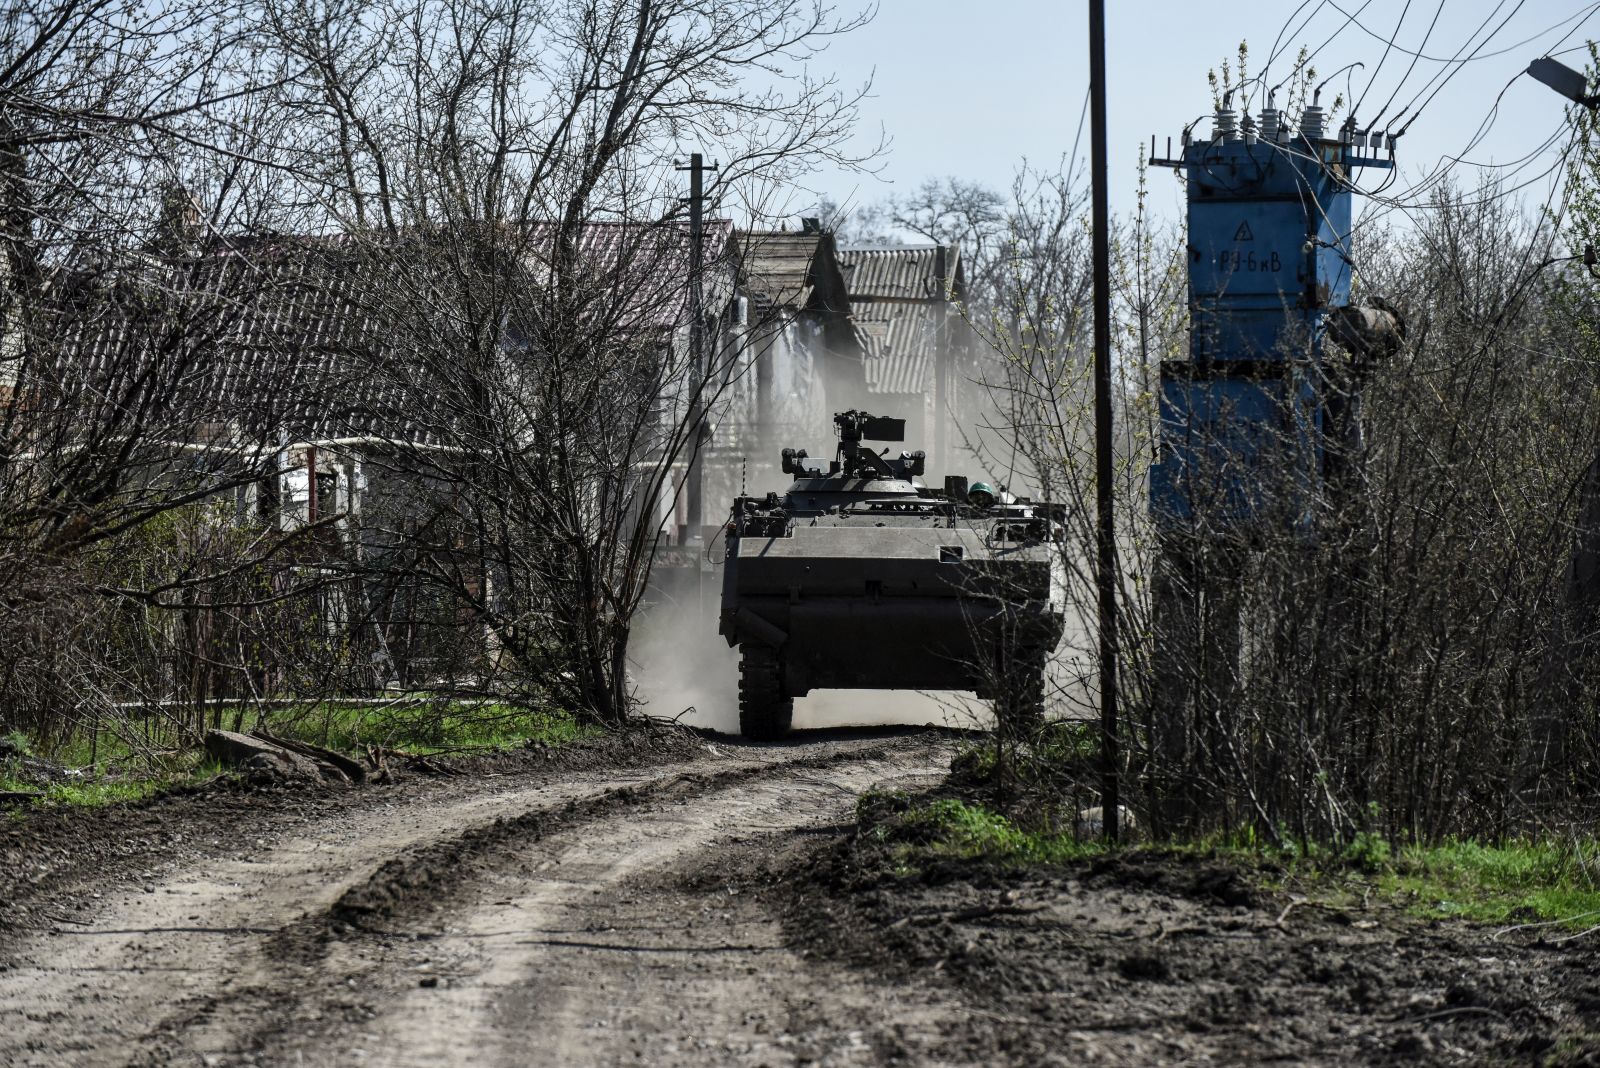 epa10567784 A Ukrainian forces' M113 APC drives at an undisclosed location near Bakhmut, Donetsk region, Ukraine, 10 April 2023. Russian troops entered Ukrainian territory on 24 February 2022, starting a conflict that has provoked destruction and a humanitarian crisis.  EPA/OLEG PETRASYUK